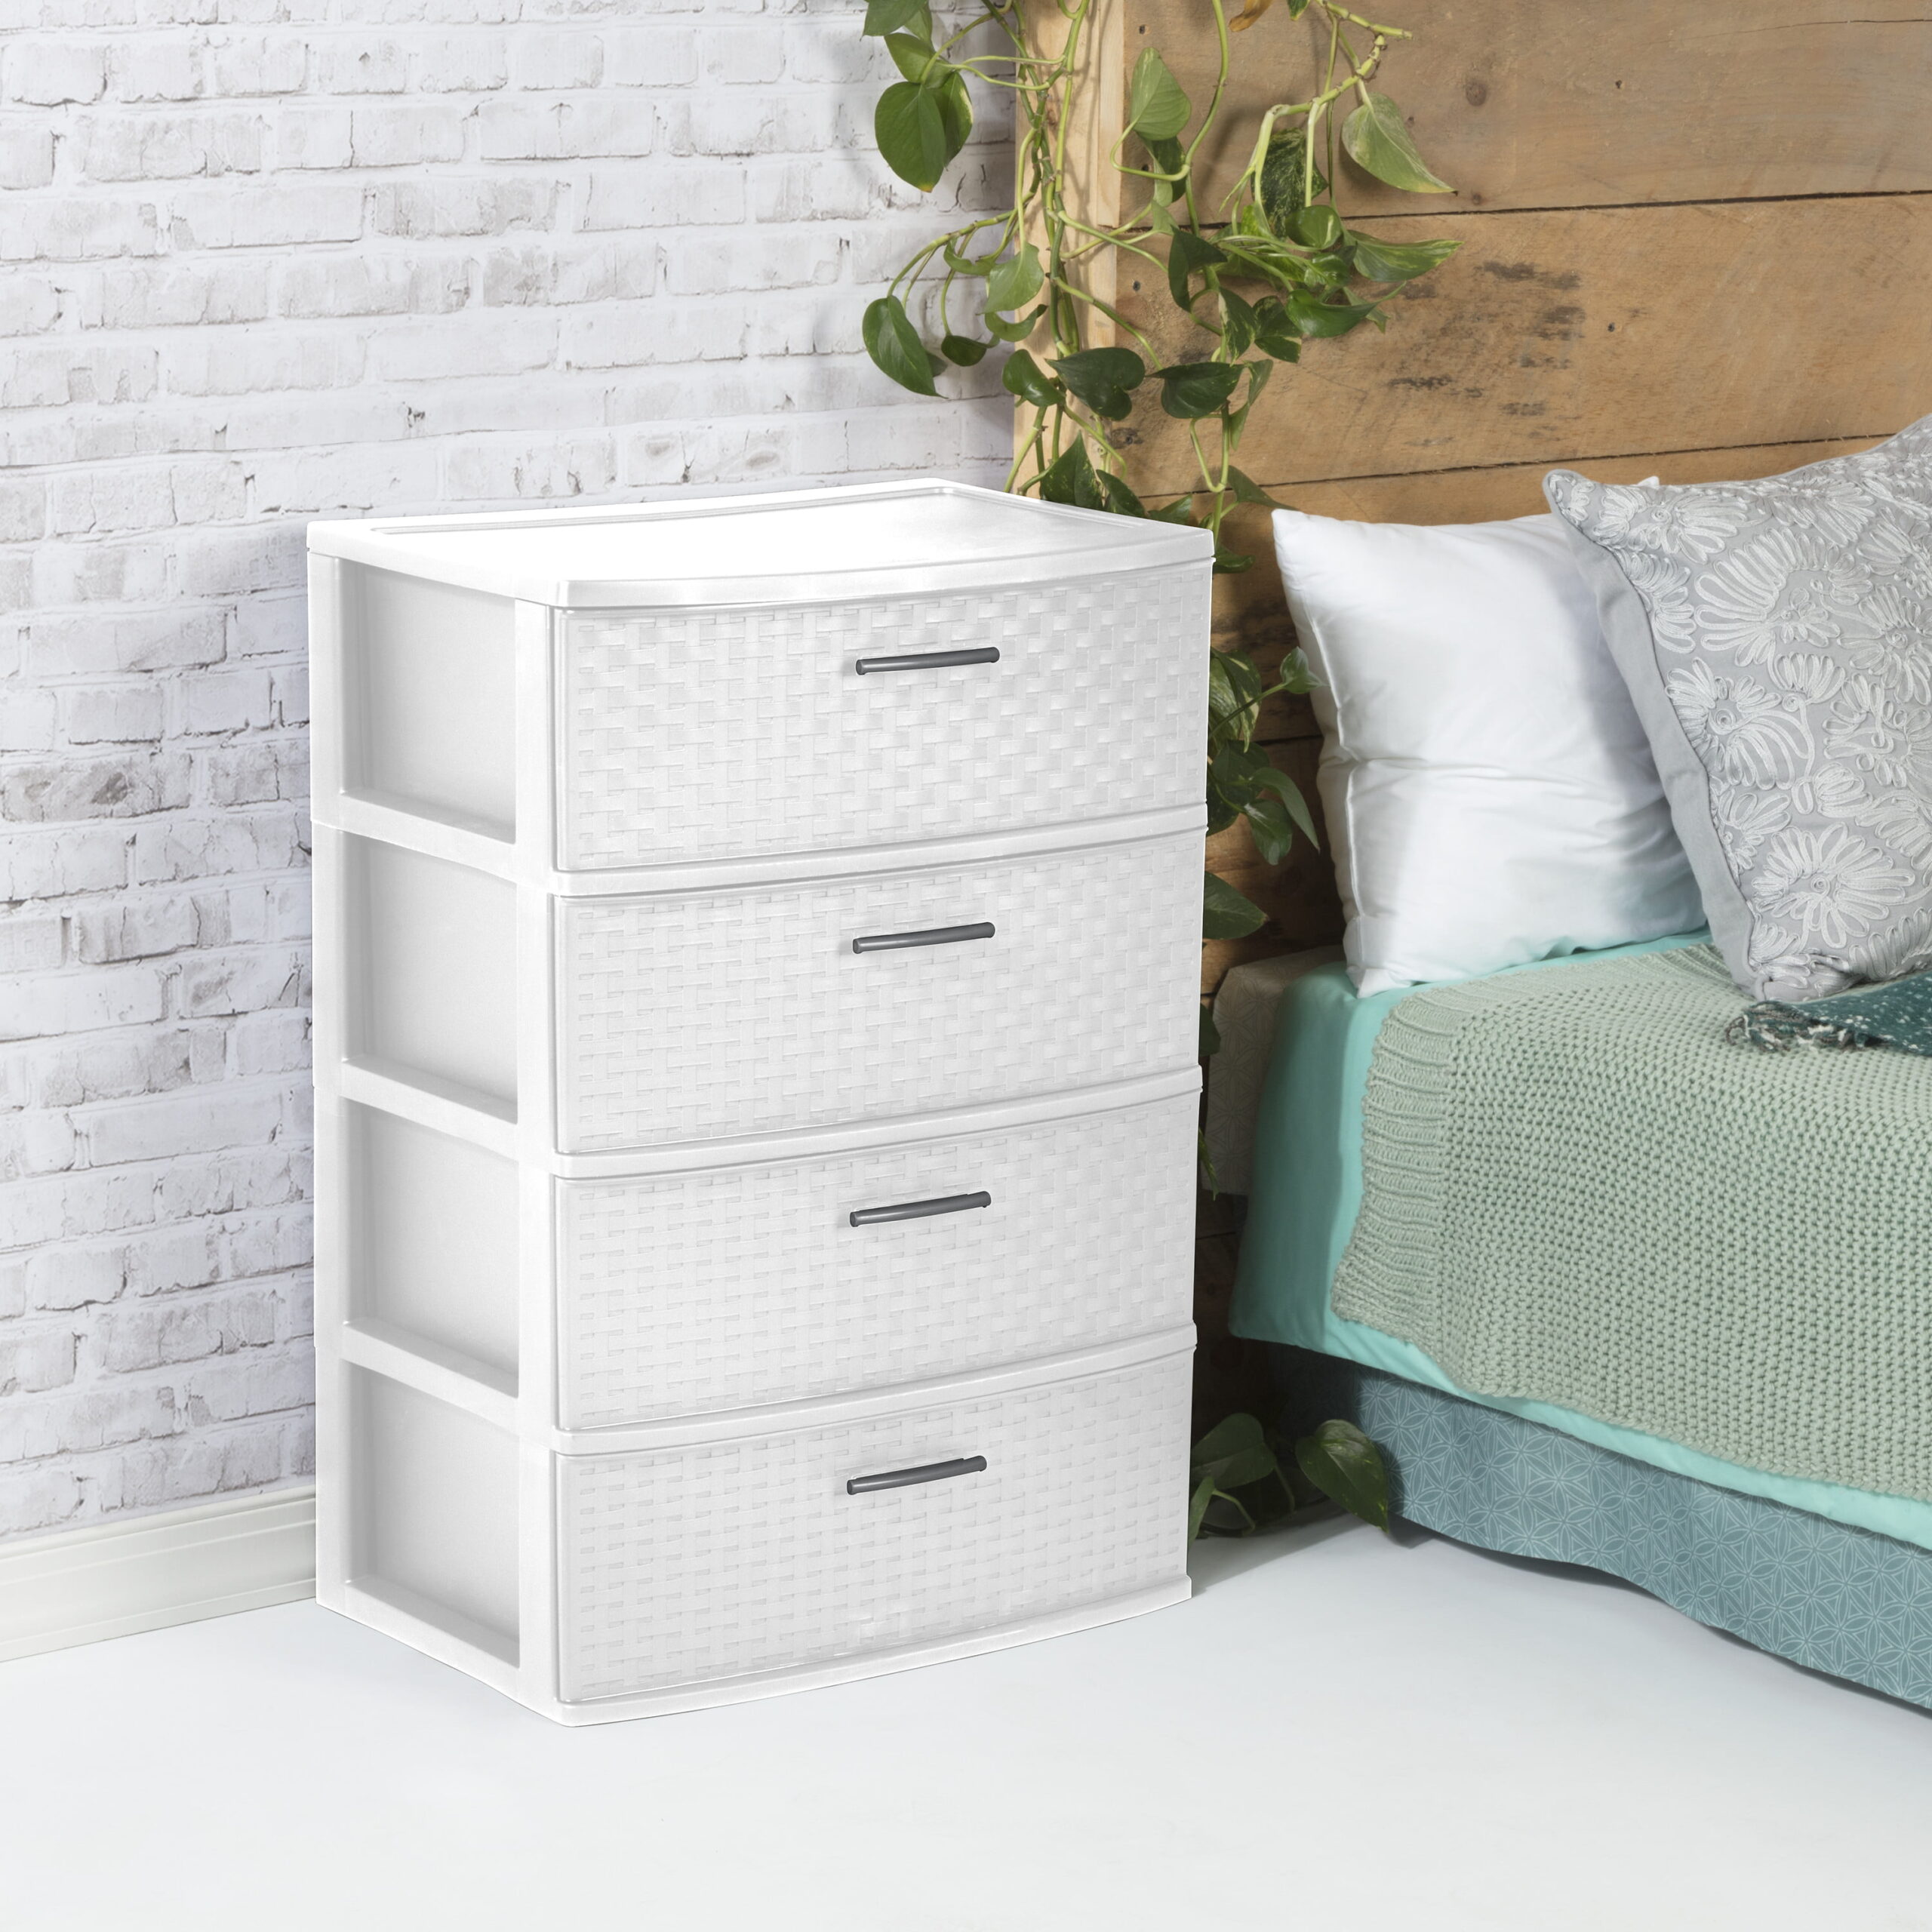 Sterilite 3-Drawer Wide Tower, Cement Weave